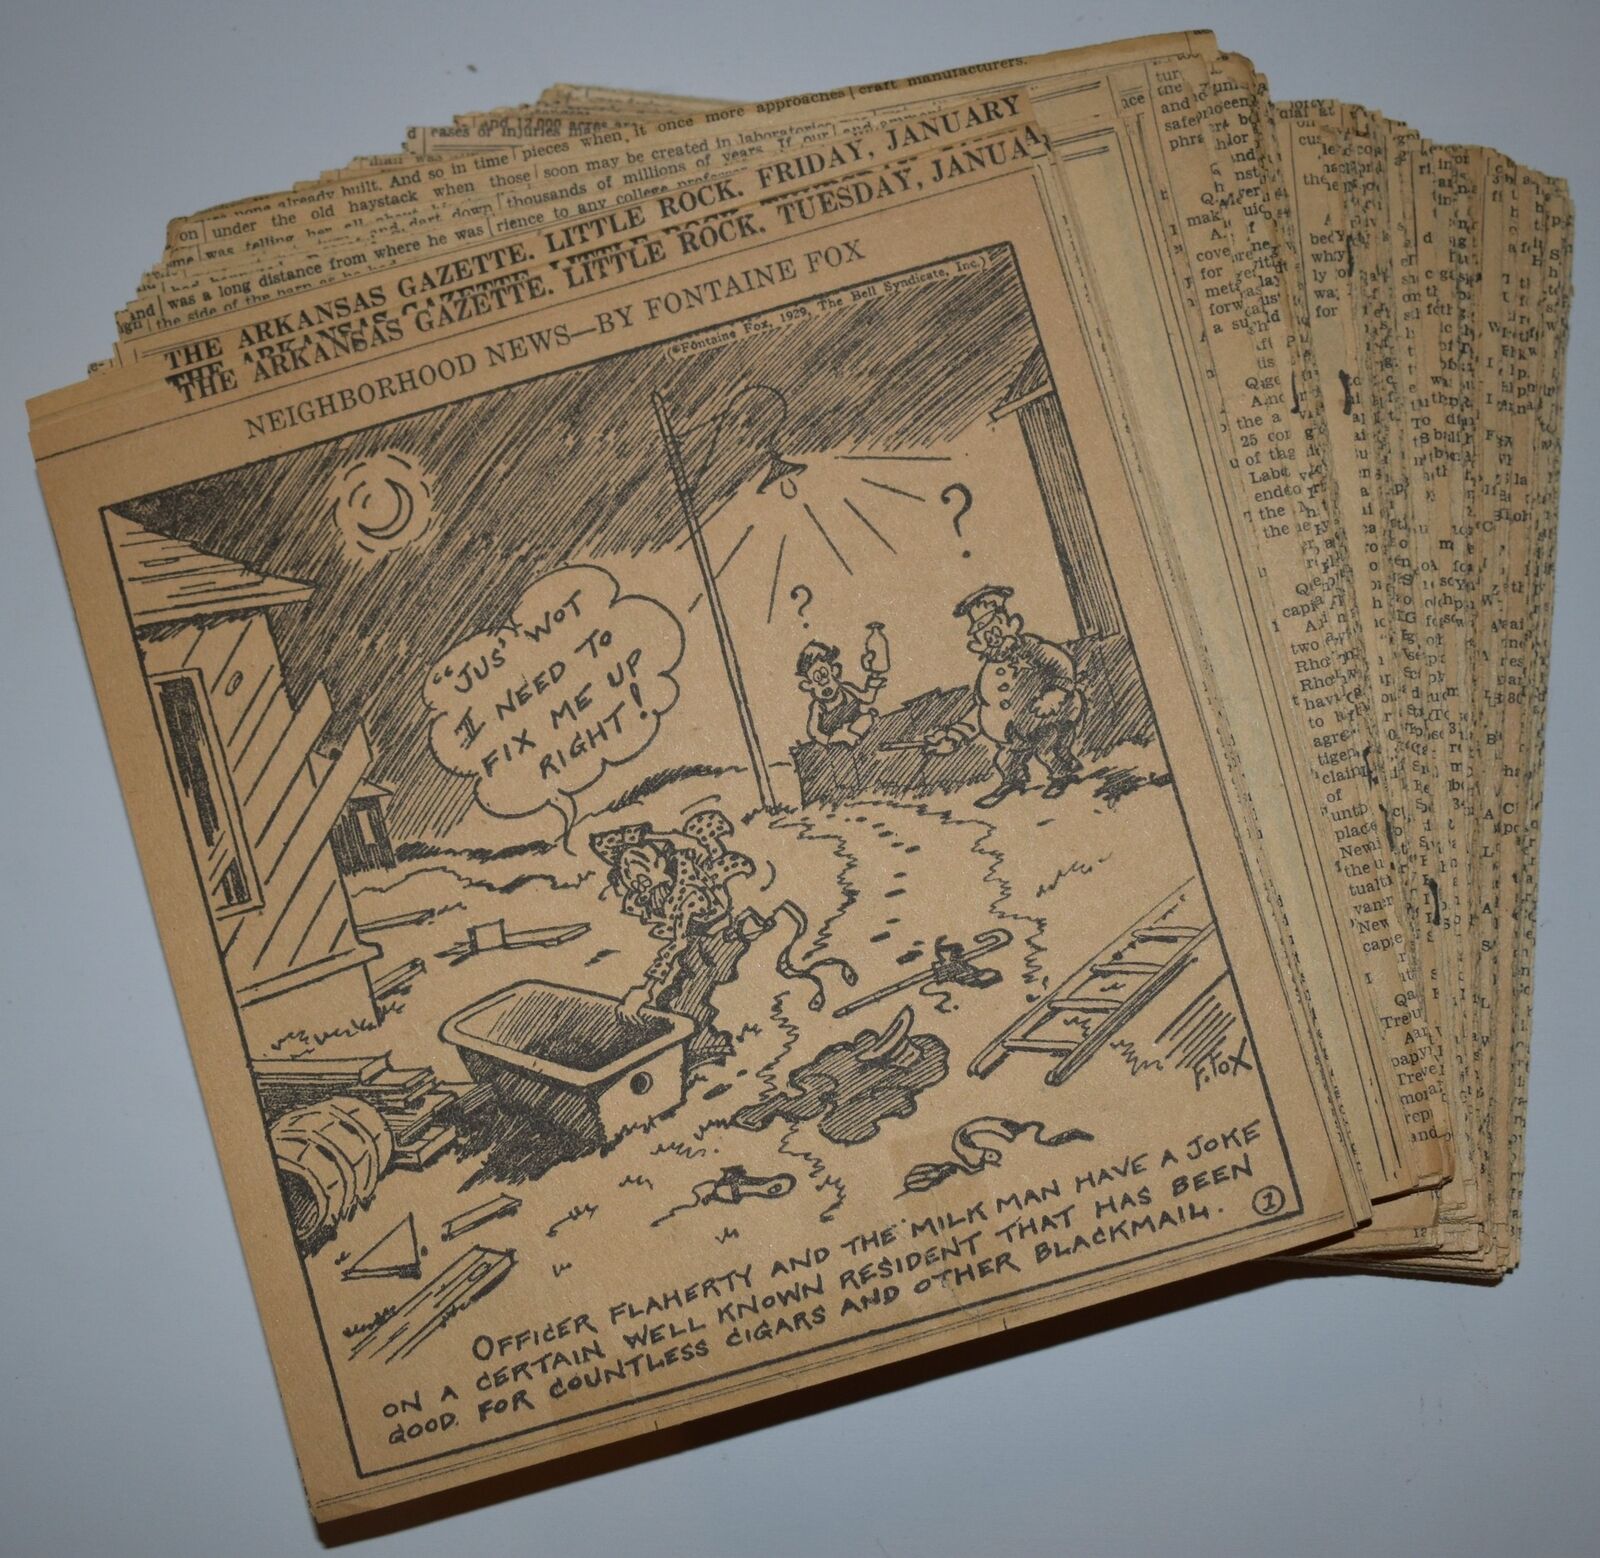 TOONERVILLE FOLKS (1929) - 303 Daily Newspaper Comics - by FONTAINE FOX